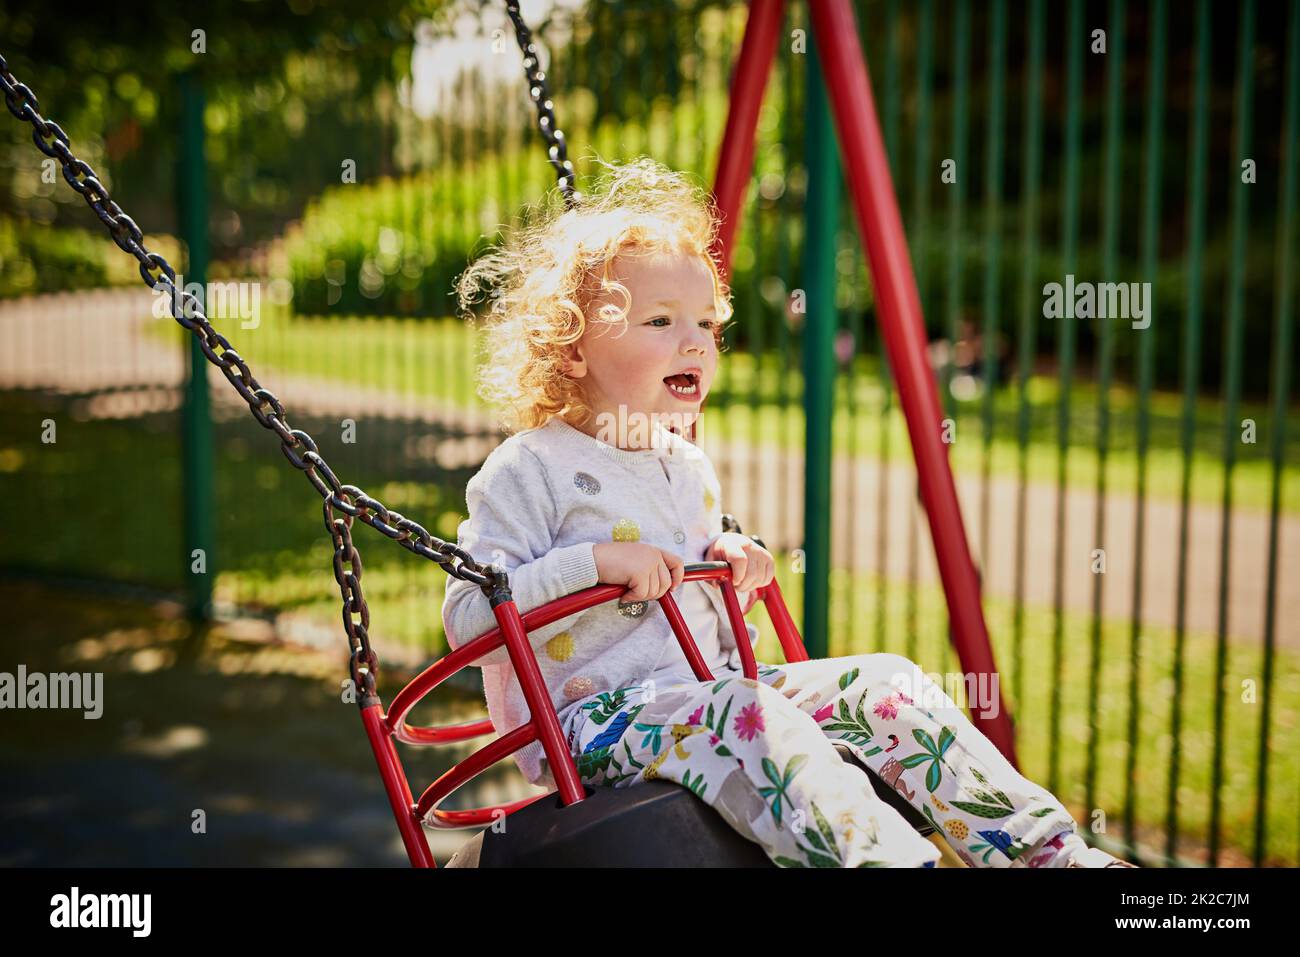 Swinging into a day of fun. Shot of an adorable little girl playing on the swing outdoors. Stock Photo